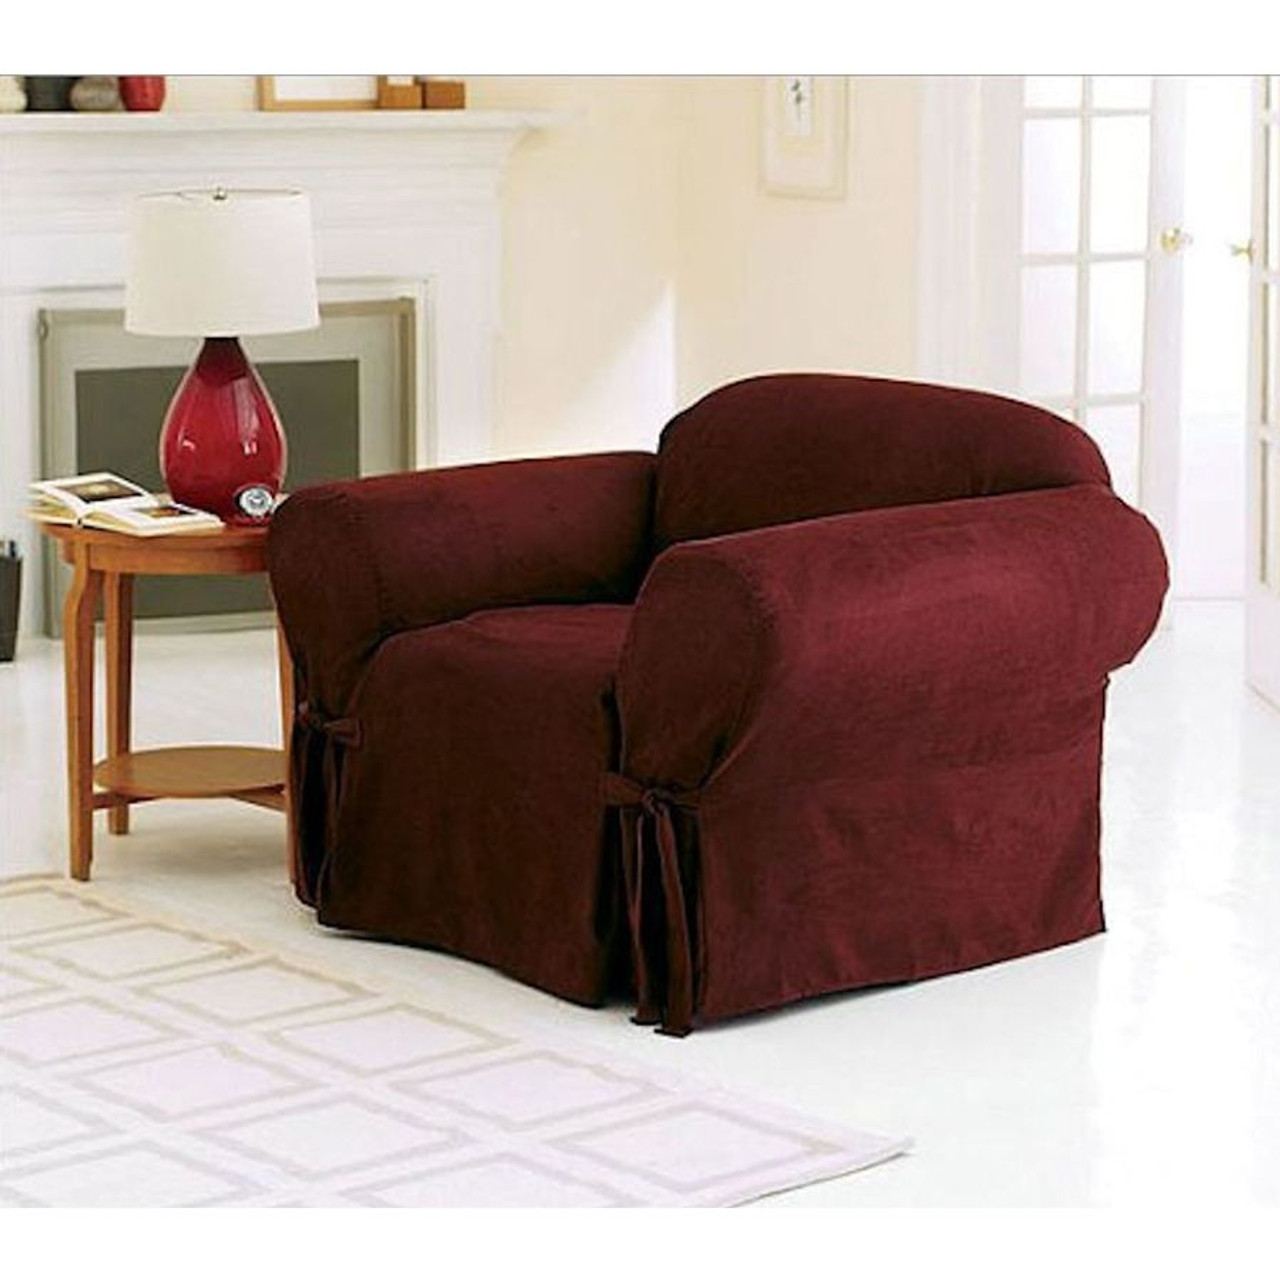 1 PC Soft Micro Suede Furniture Slipcover for Chair